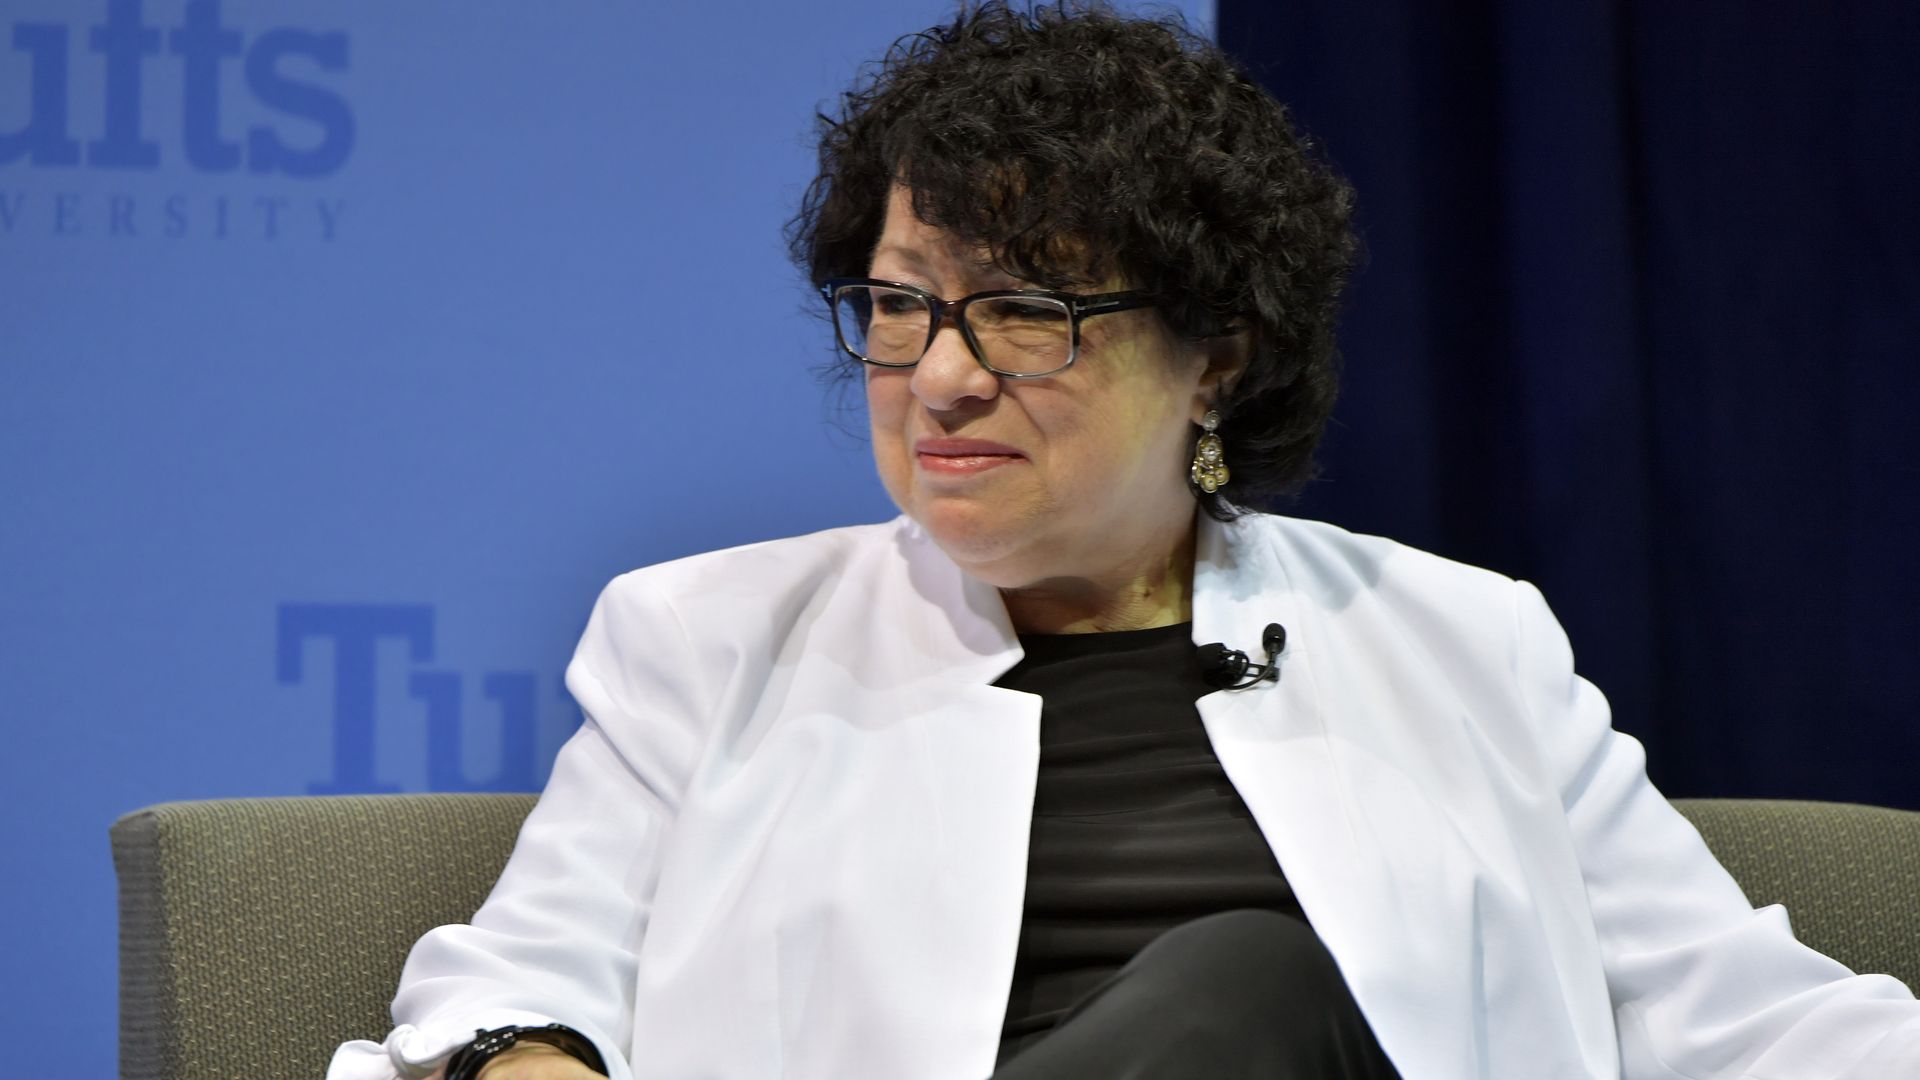 Photo of Sonia Sotomayor sitting on a stage 